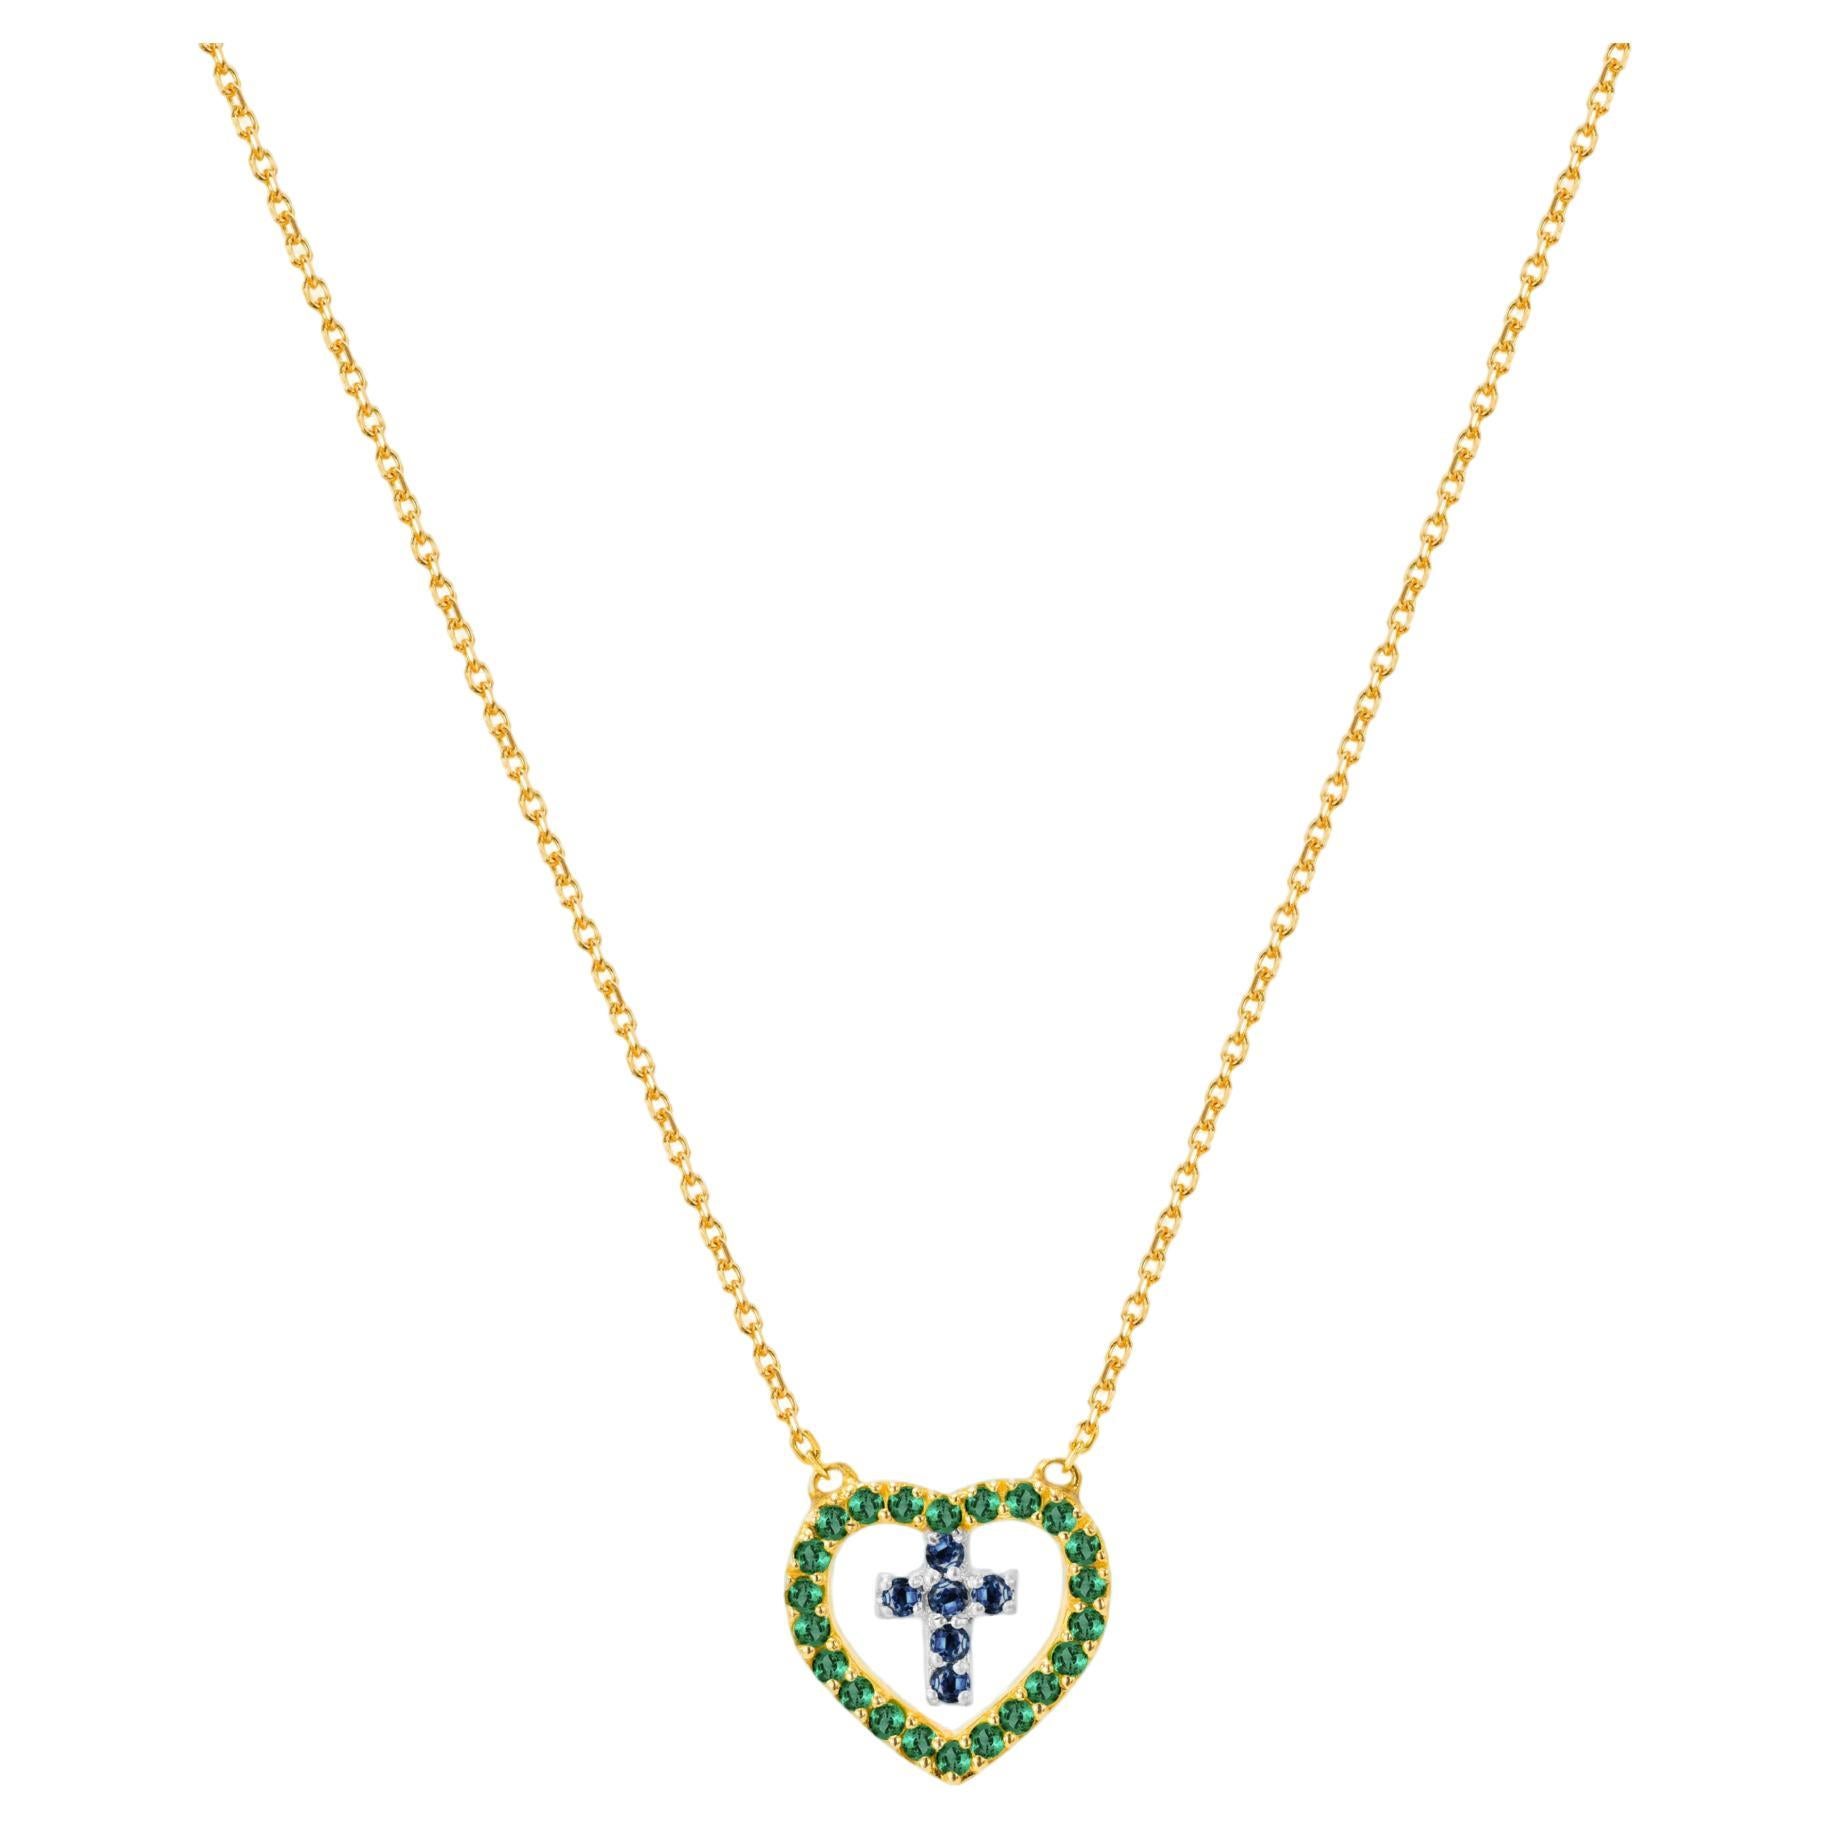 14k Gold Genuine Emerald and Blue Sapphire Necklace Cross in Heart Necklace For Sale